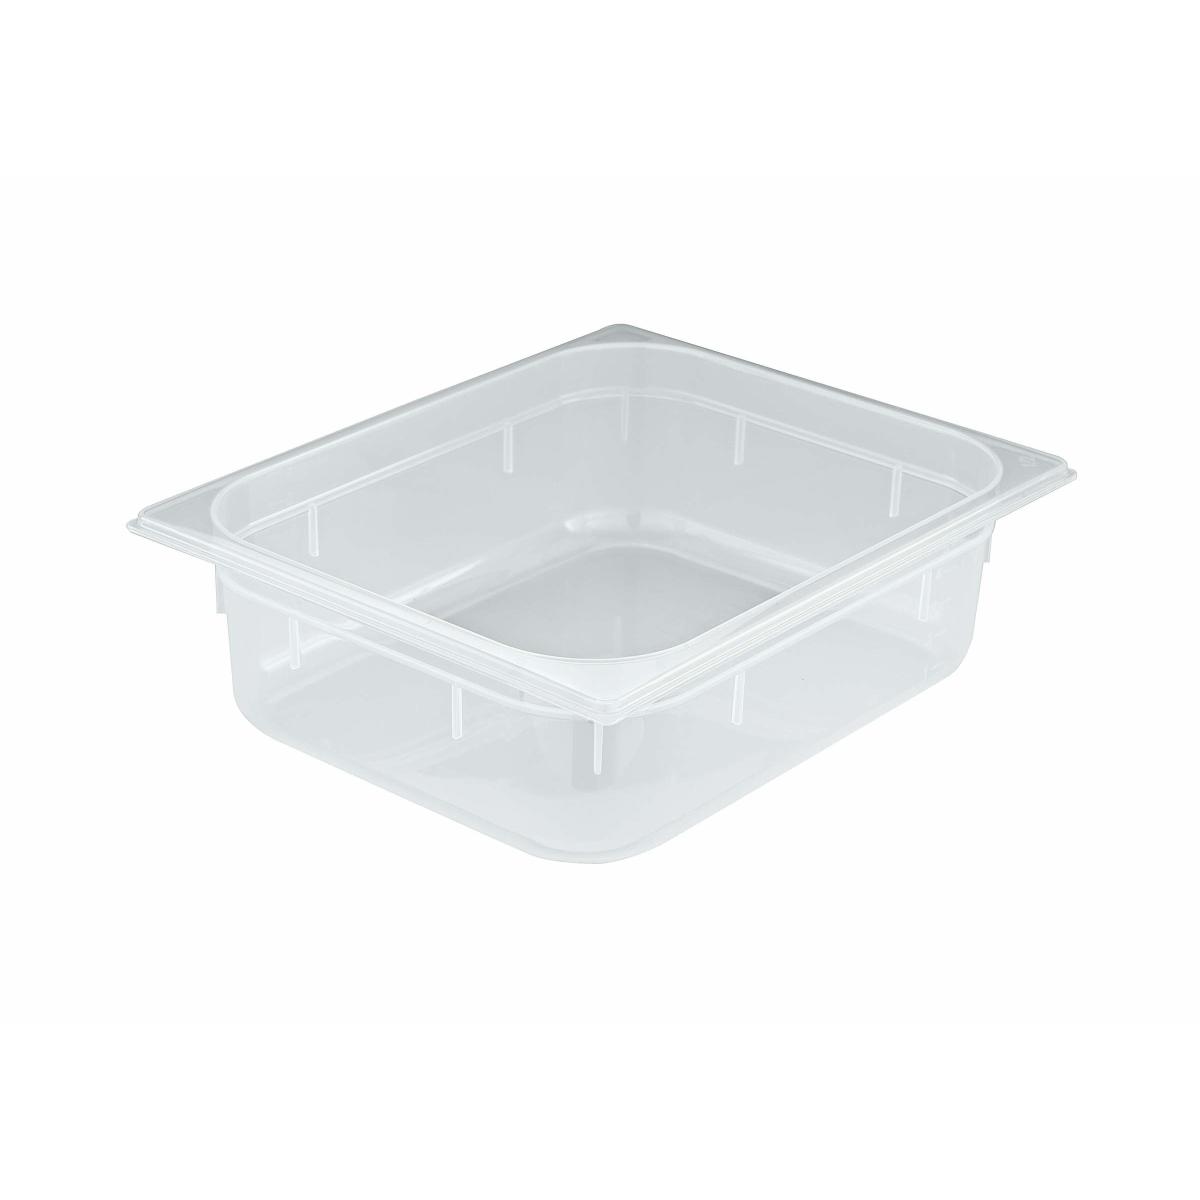 Bacinella gn 1/4 gastronorm pp cm 26,5x16x6,5